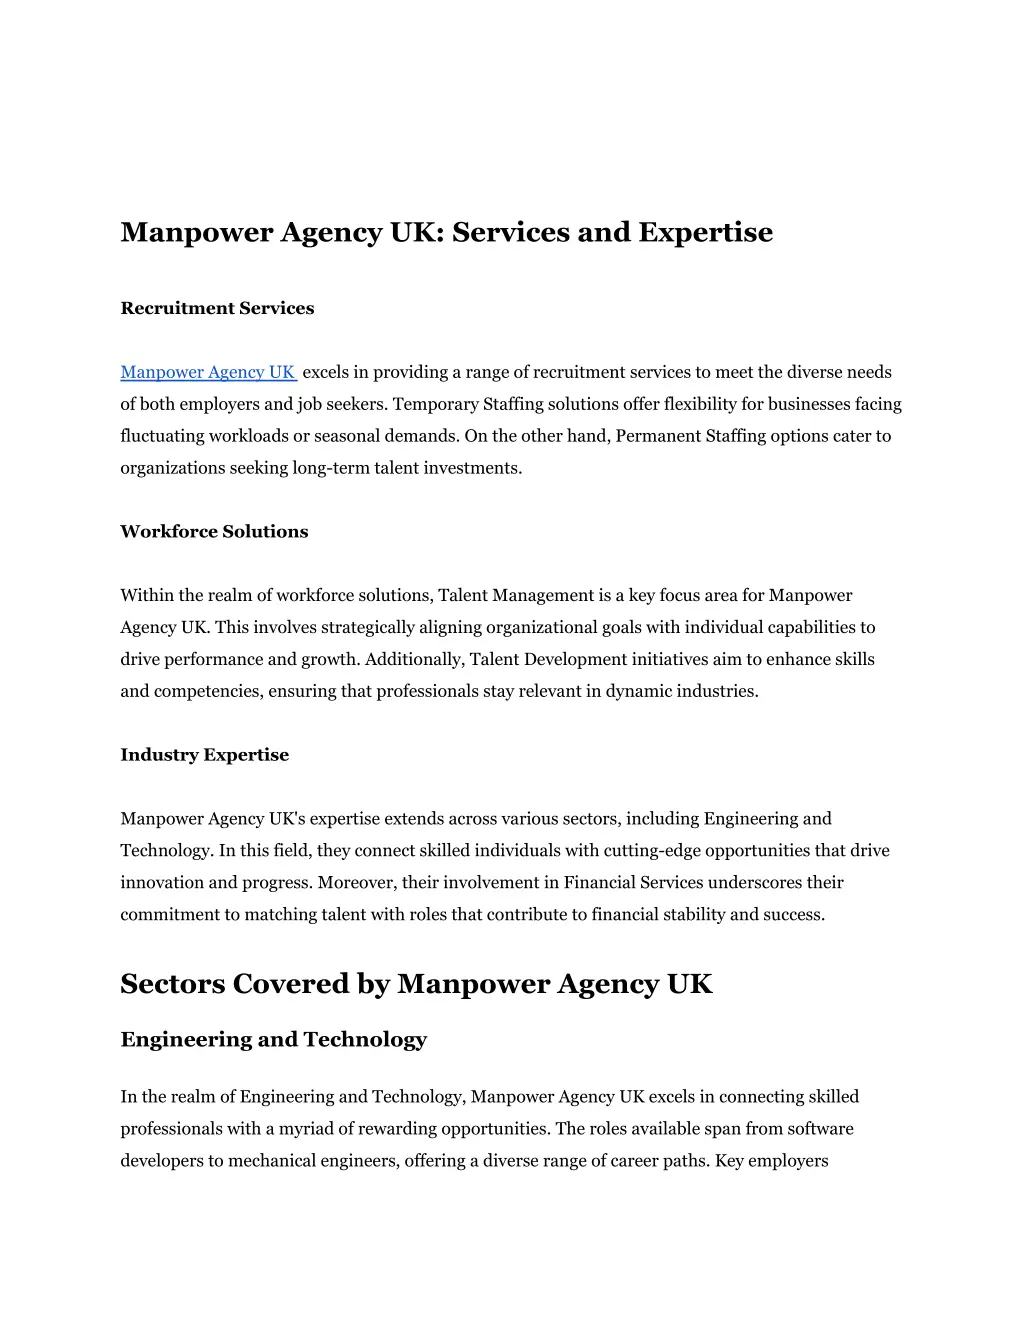 manpower agency uk services and expertise